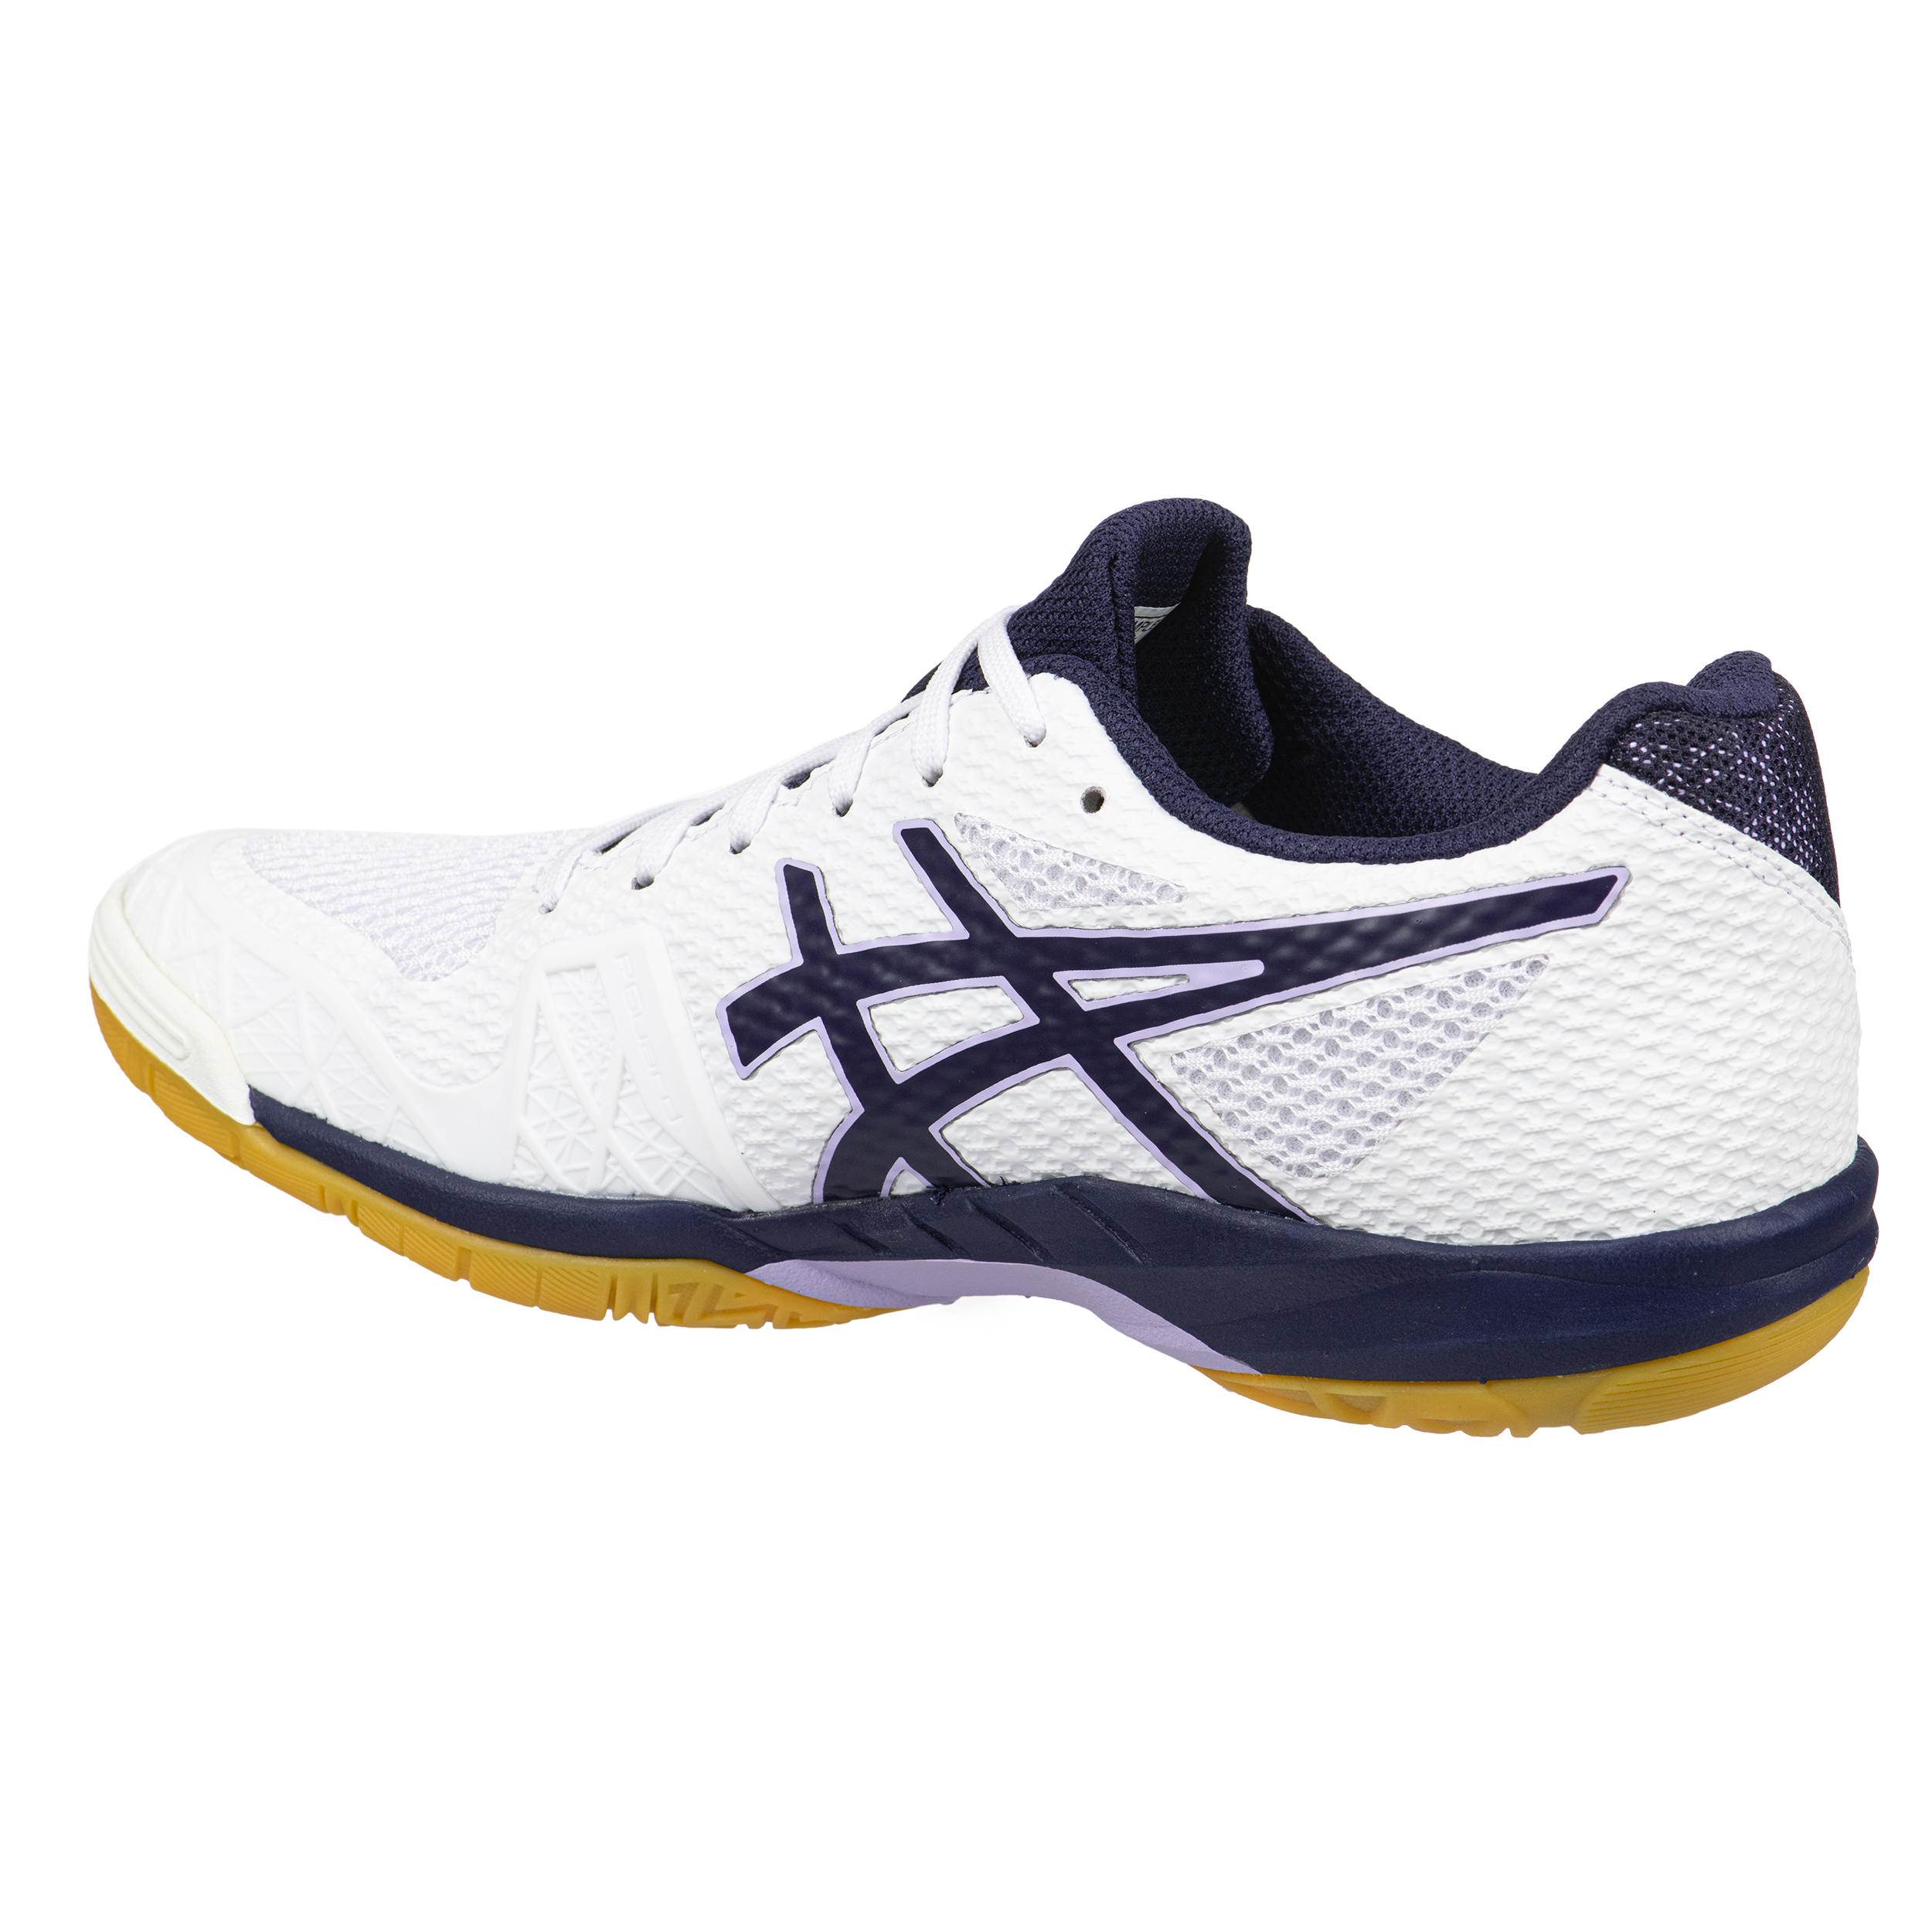 Badminton and Indoor Sports Shoes Gel Blade 7 - White/Navy 4/6